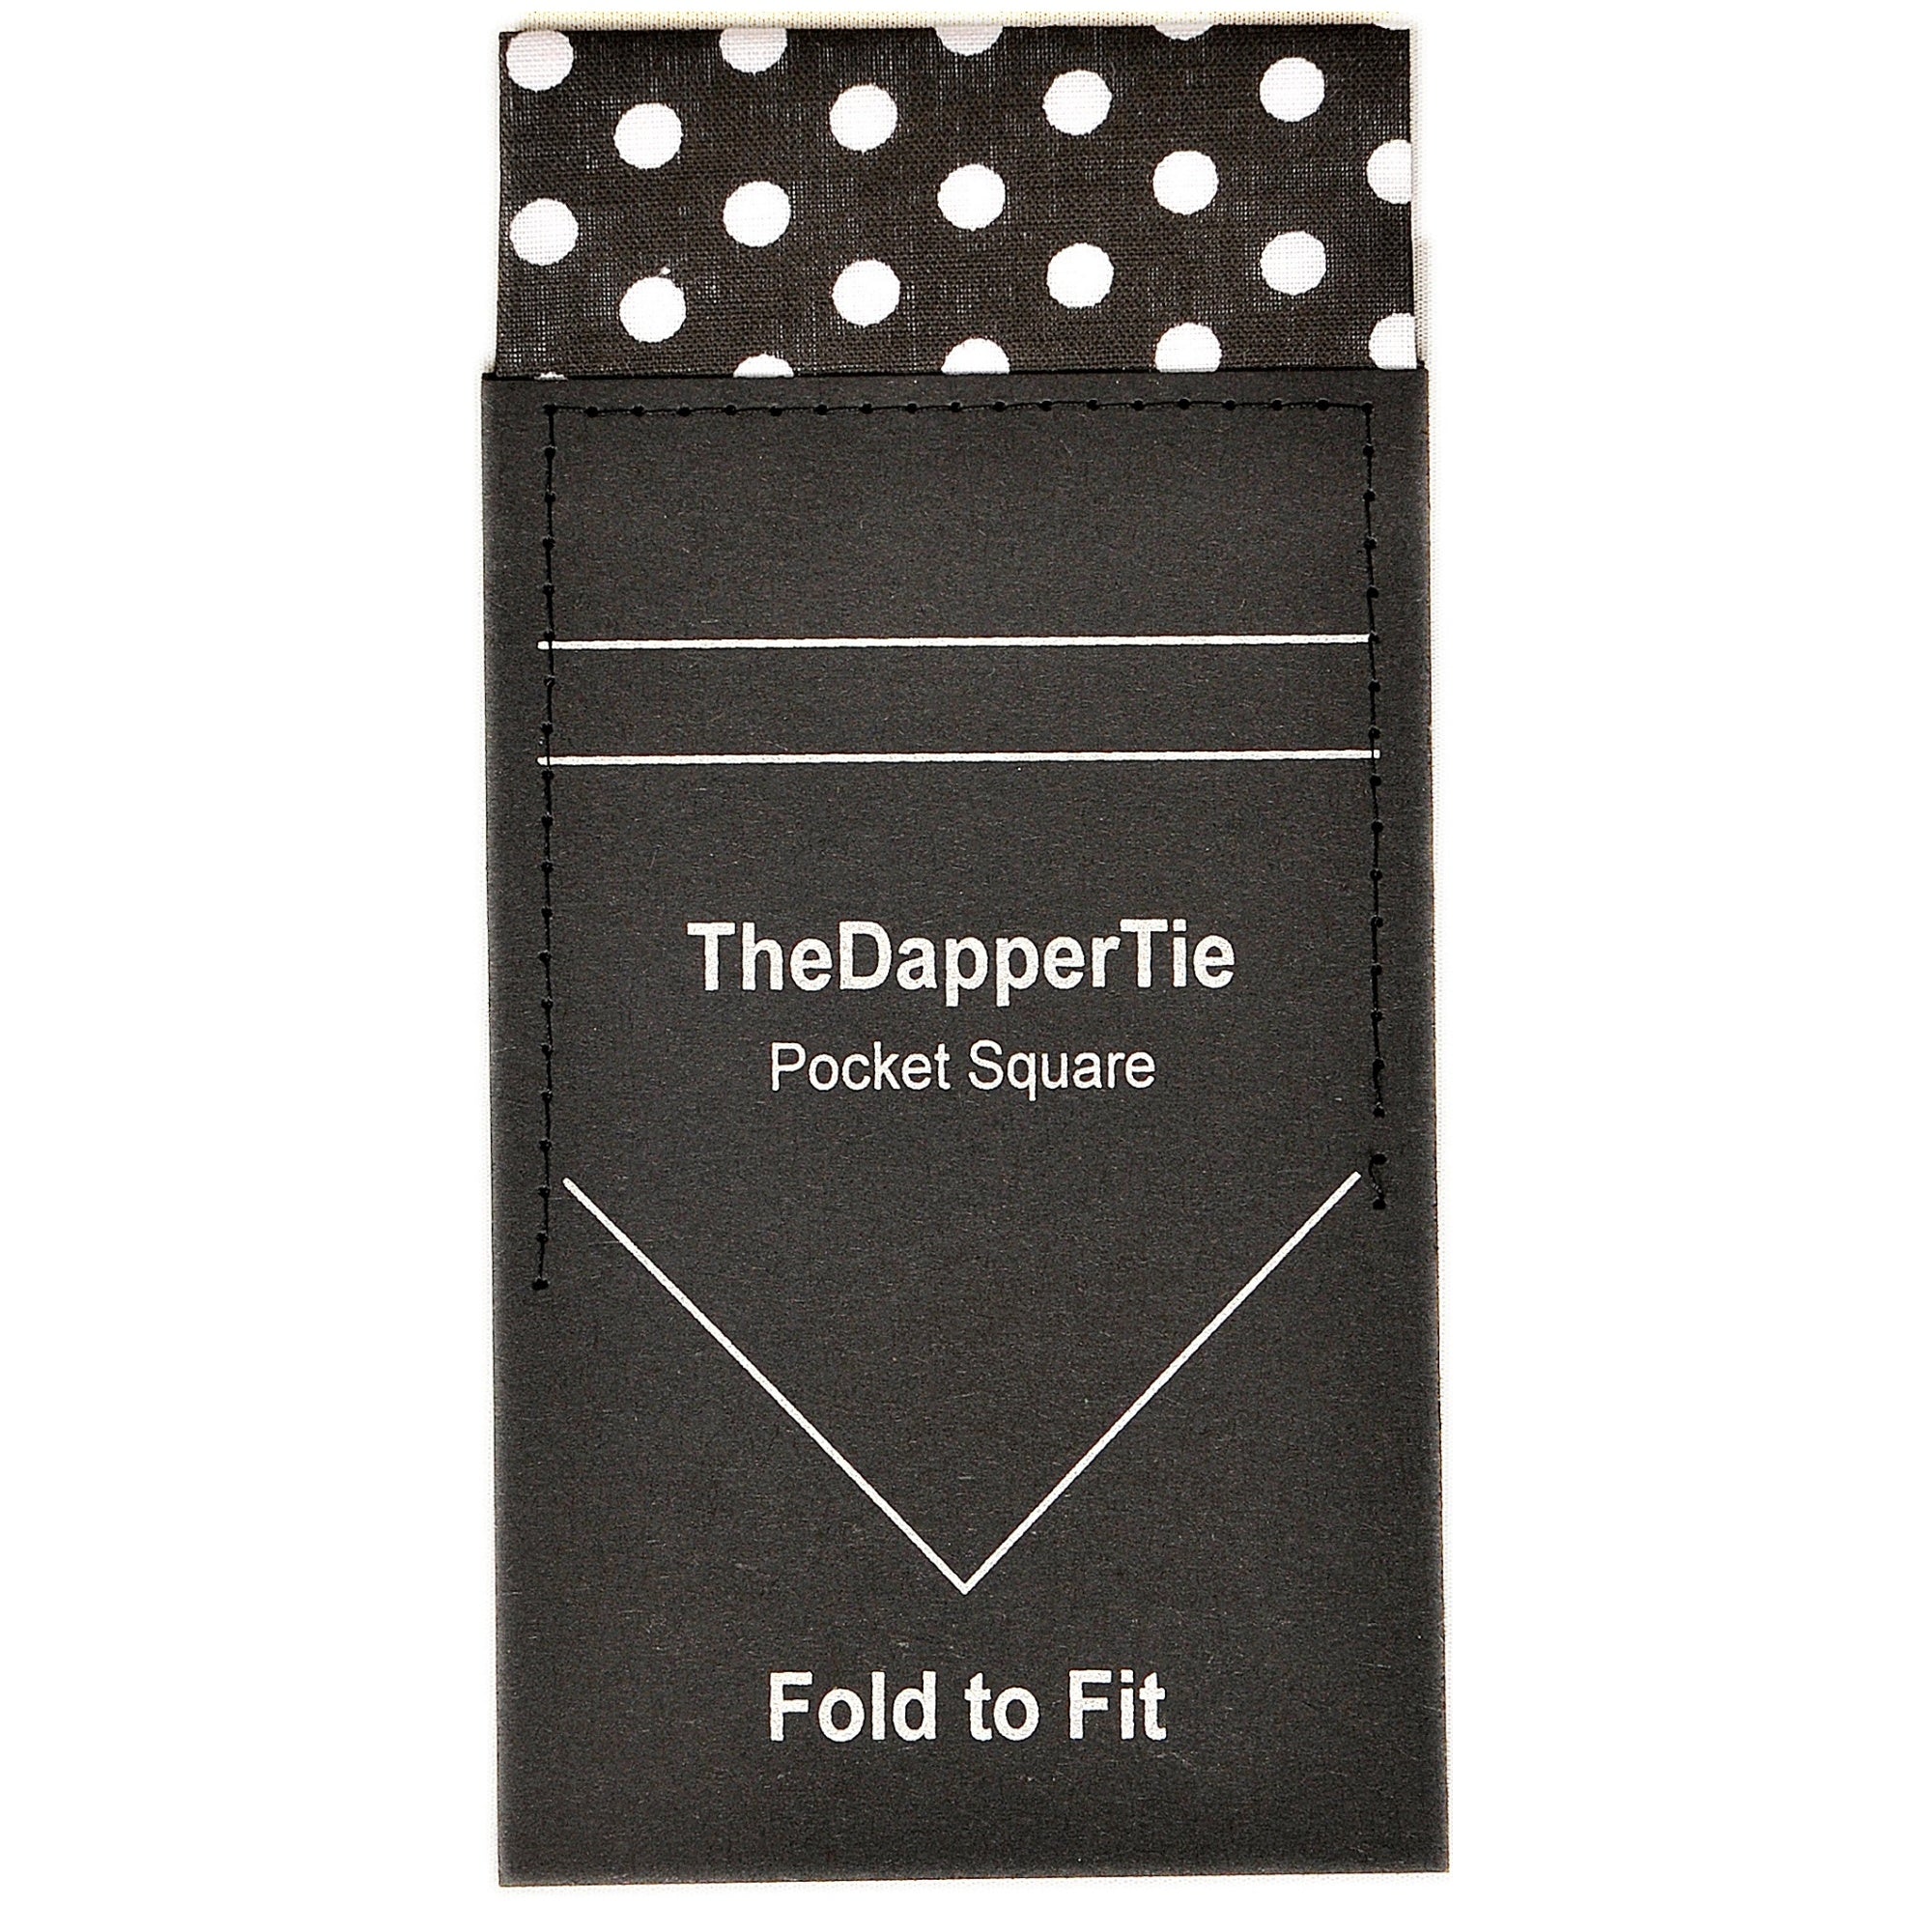 New Men's Polka Dots 100% Cotton Flat Pre Folded Pocket Square on Card - TheDapperTie Prefolded Pocket Squares TheDapperTie Black & White  